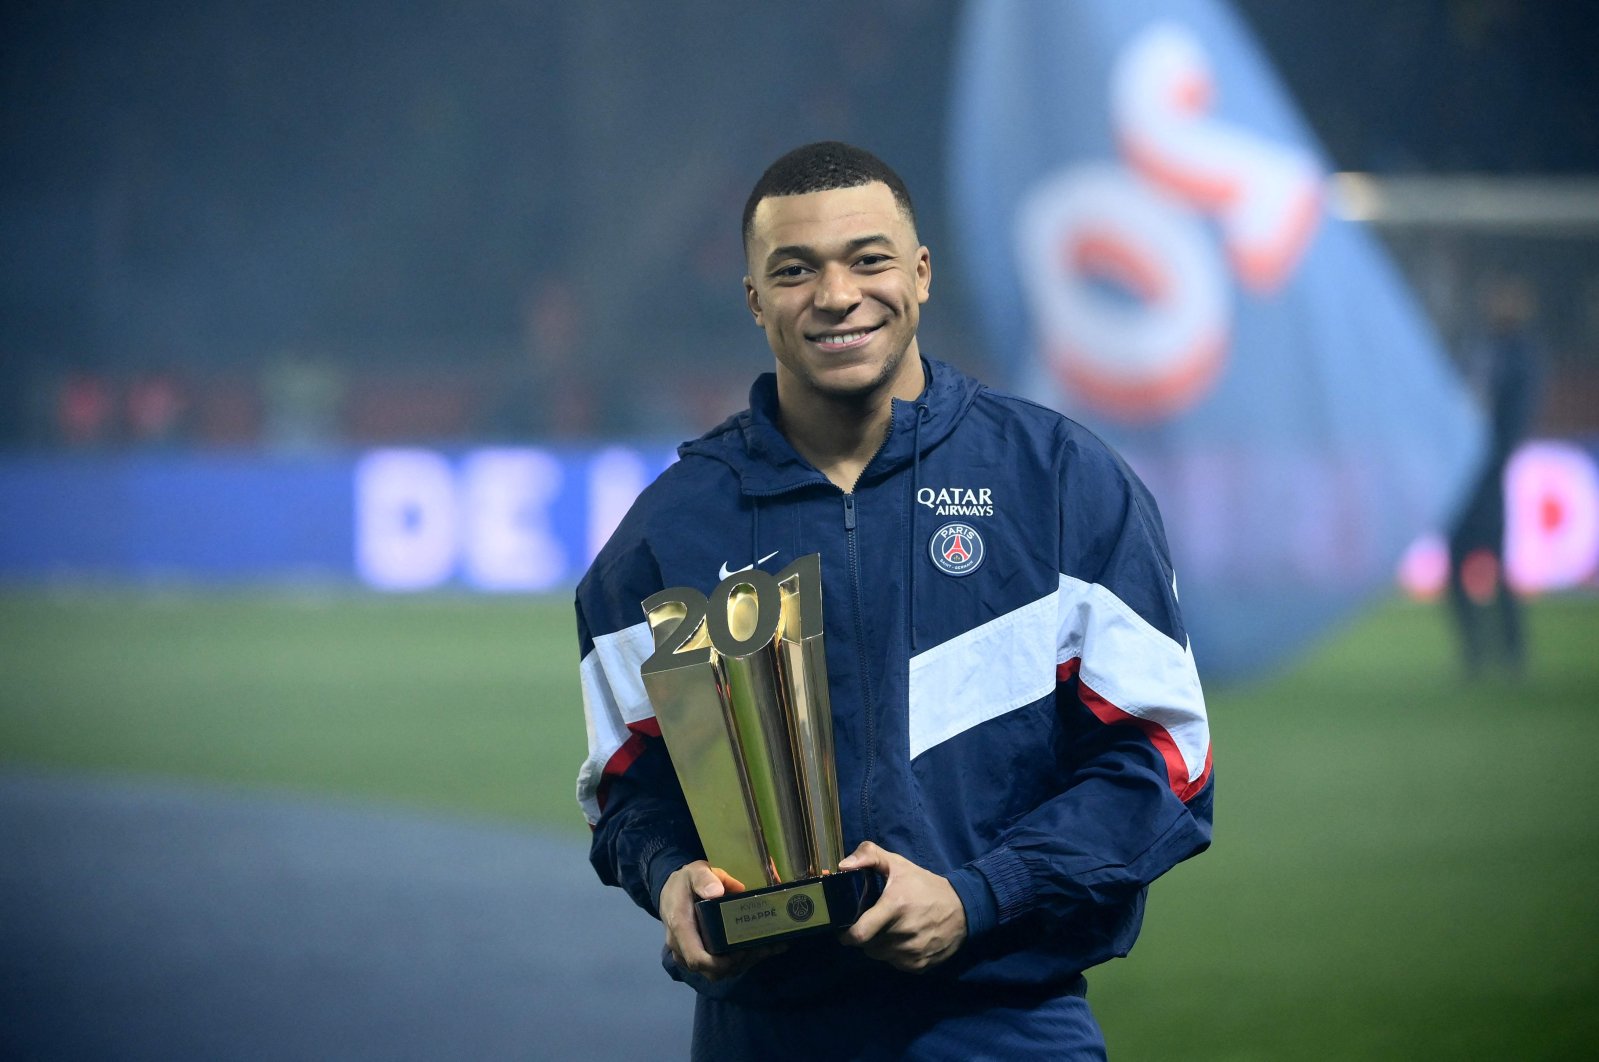 Kylian Mbappe poses with a trophy at the end of a ceremony after he became Paris Saint-Germain&#039;s all-time top scorer with his 201st goal for the club in their 4-2 win in the French L1 football match against FC Nantes at The Parc des Princes Stadium, Paris, France, March 4, 2023. (AFP Photo)